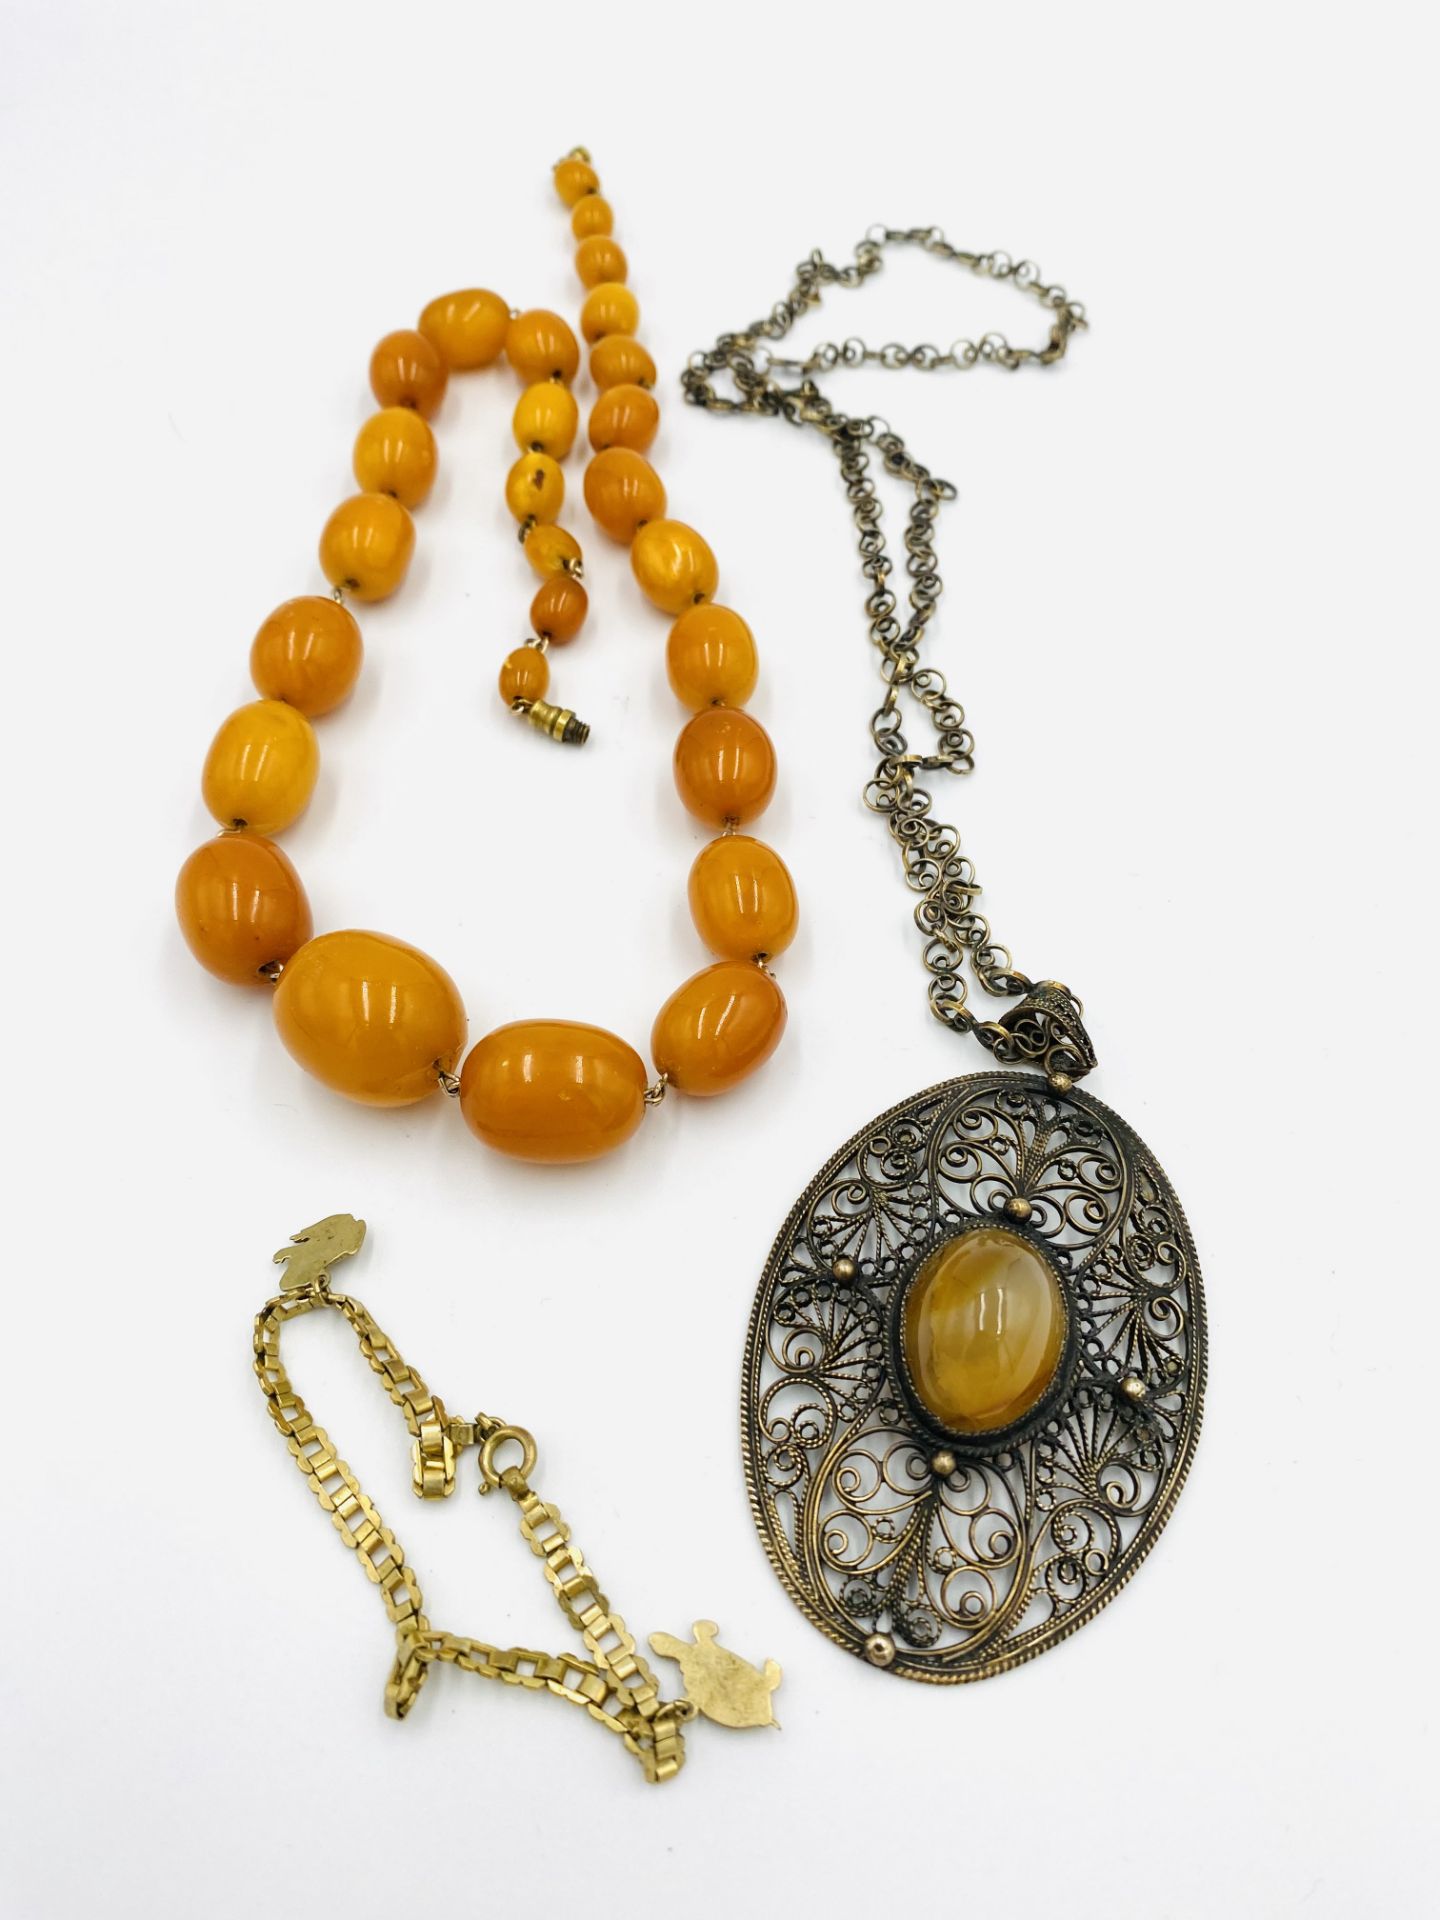 Amber bead necklace; filigree pendant necklace and a child's charm bracelet